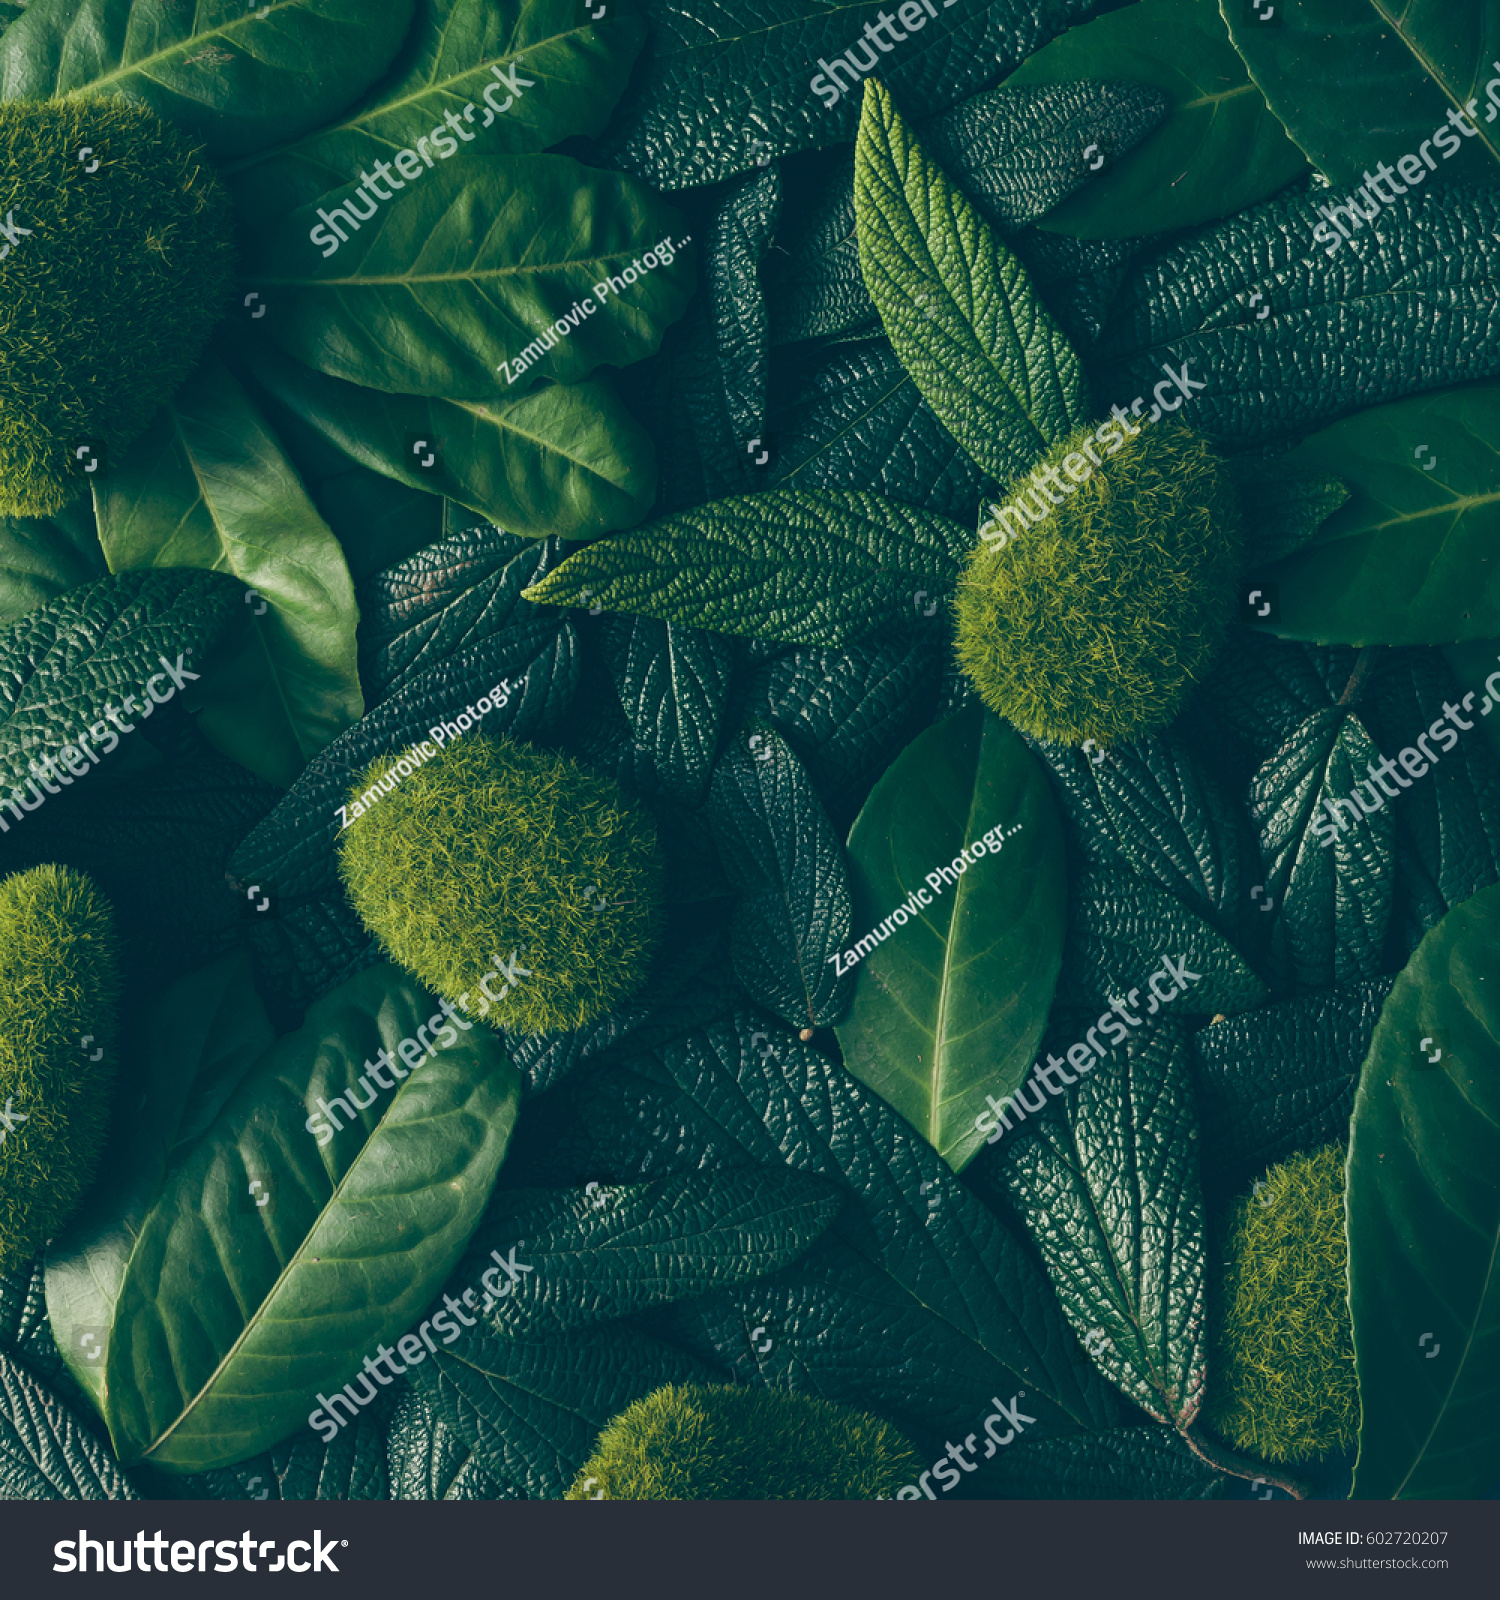 Creative layout made of green leaves. Flat lay. Nature concept #602720207